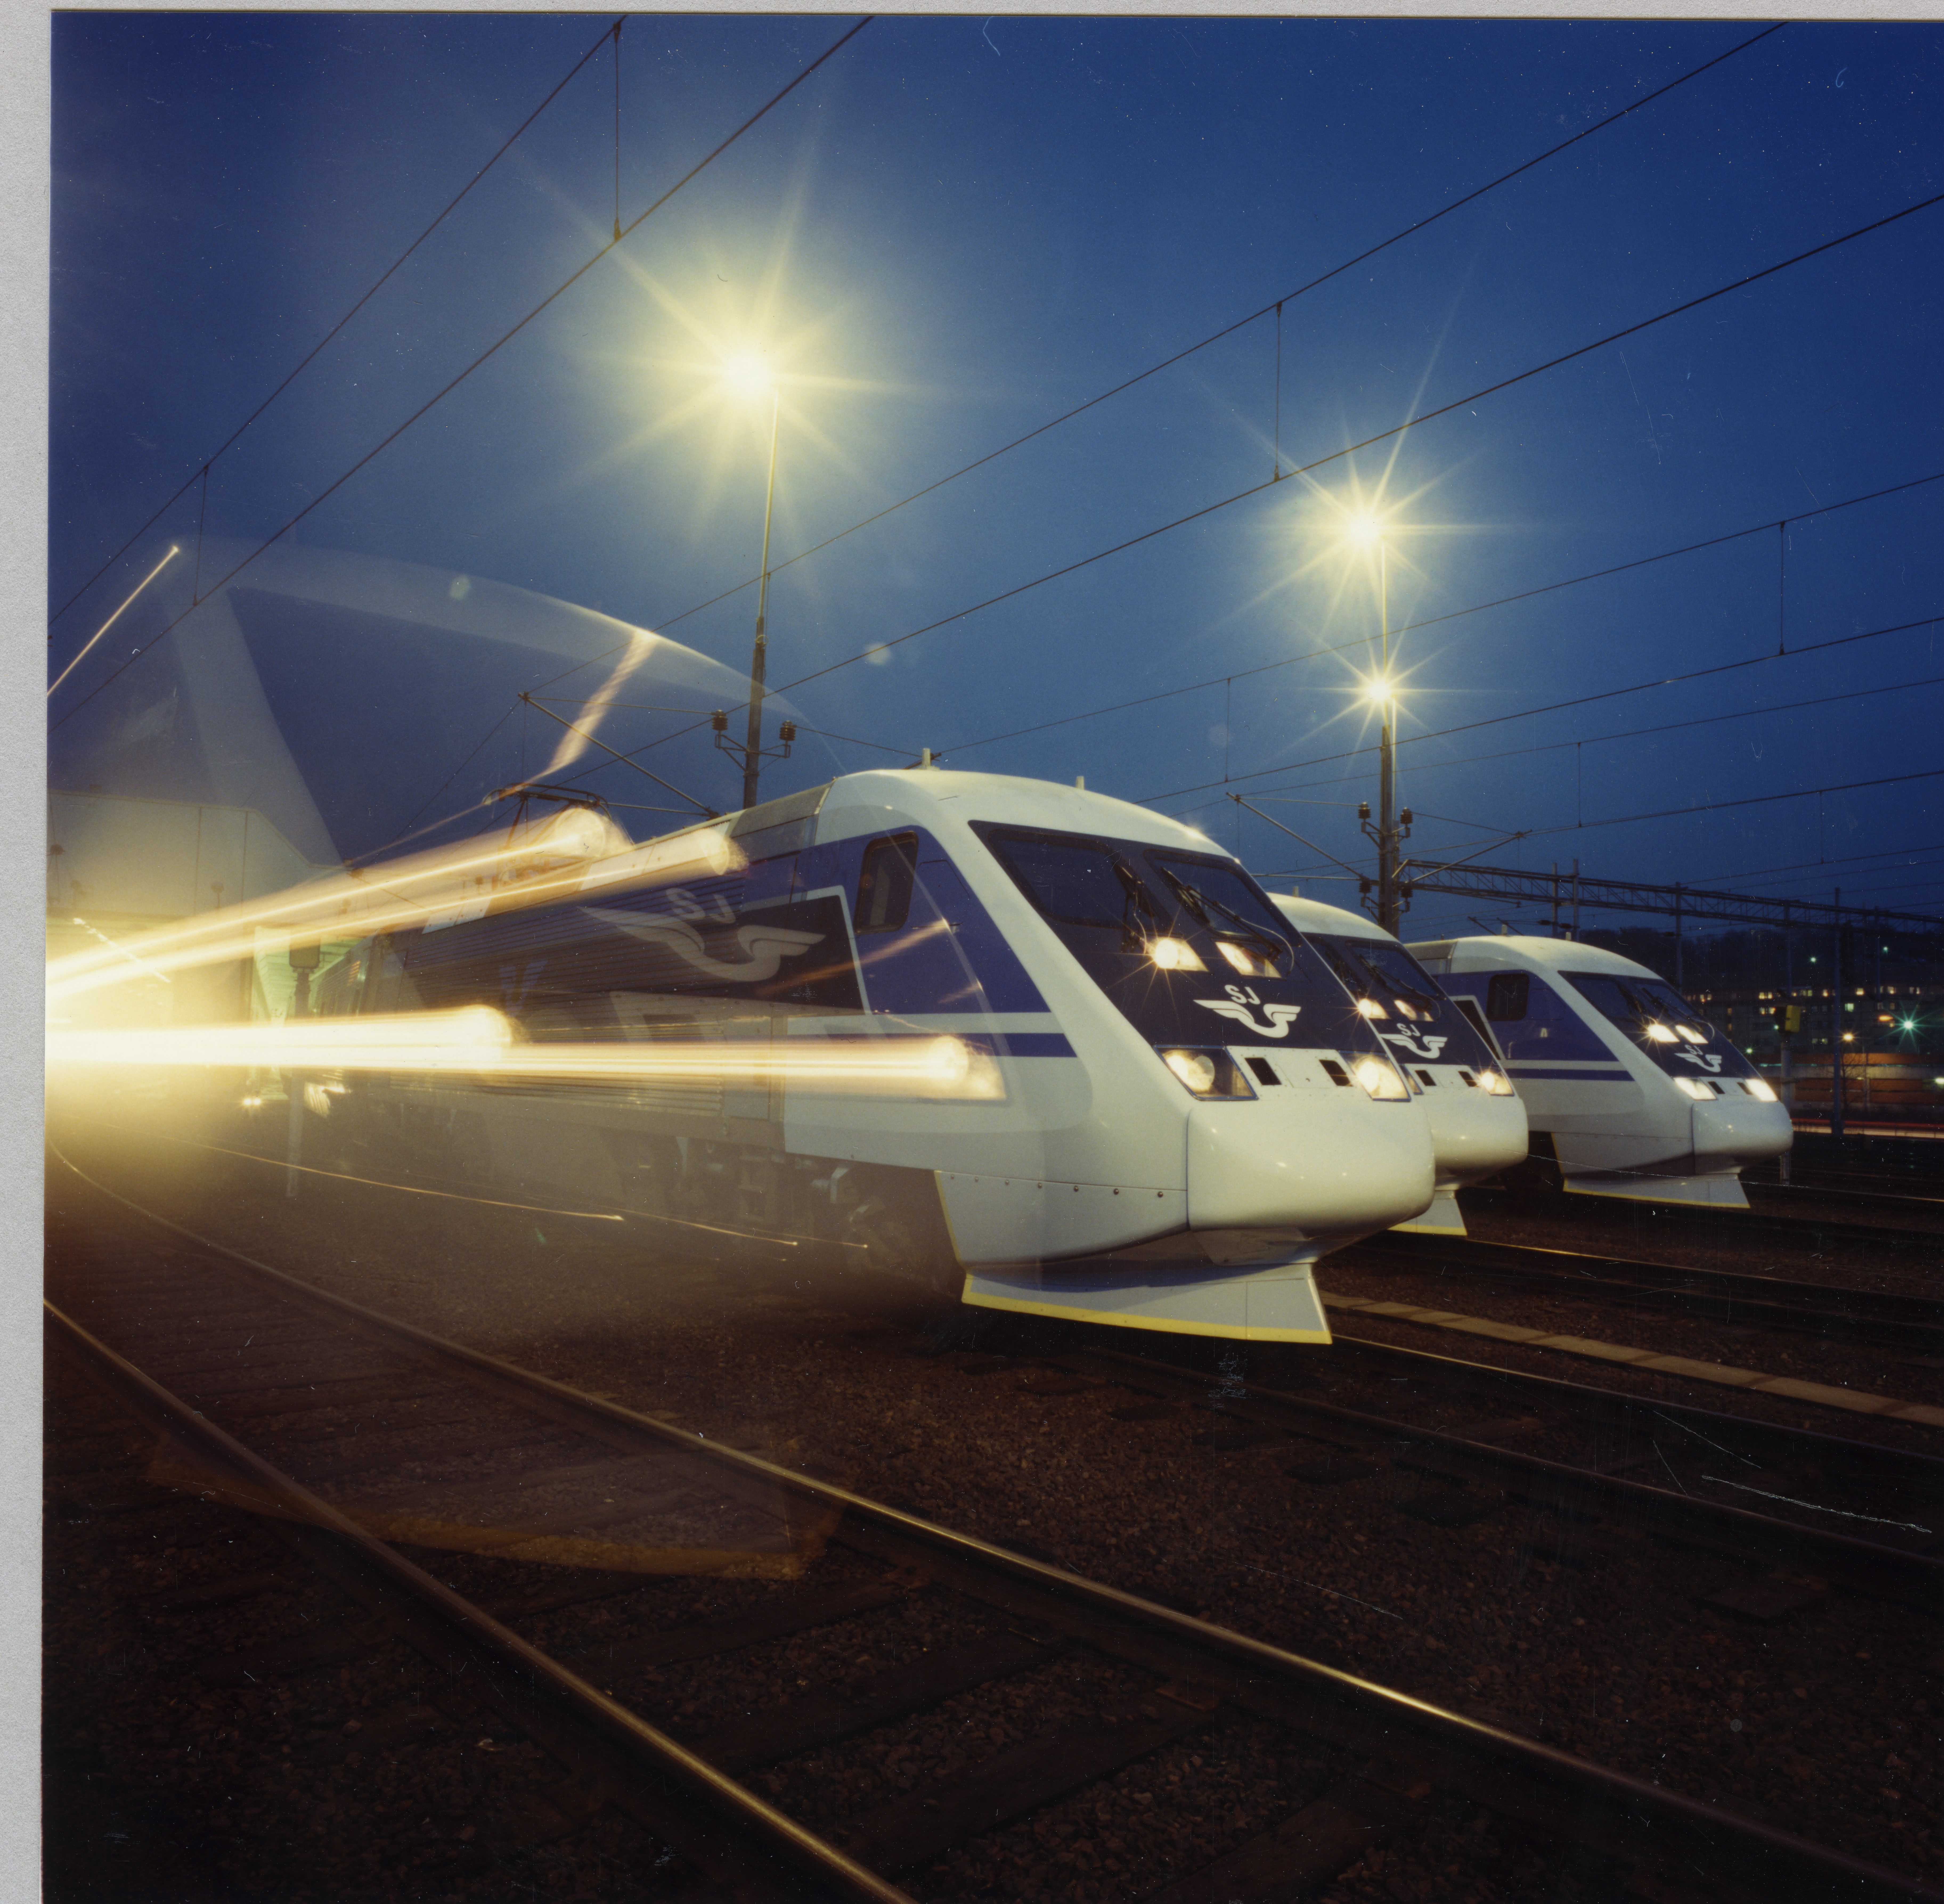 Locomotives in line, evening, shining lights and longer shutter speeds that give speed strokes in the picture.